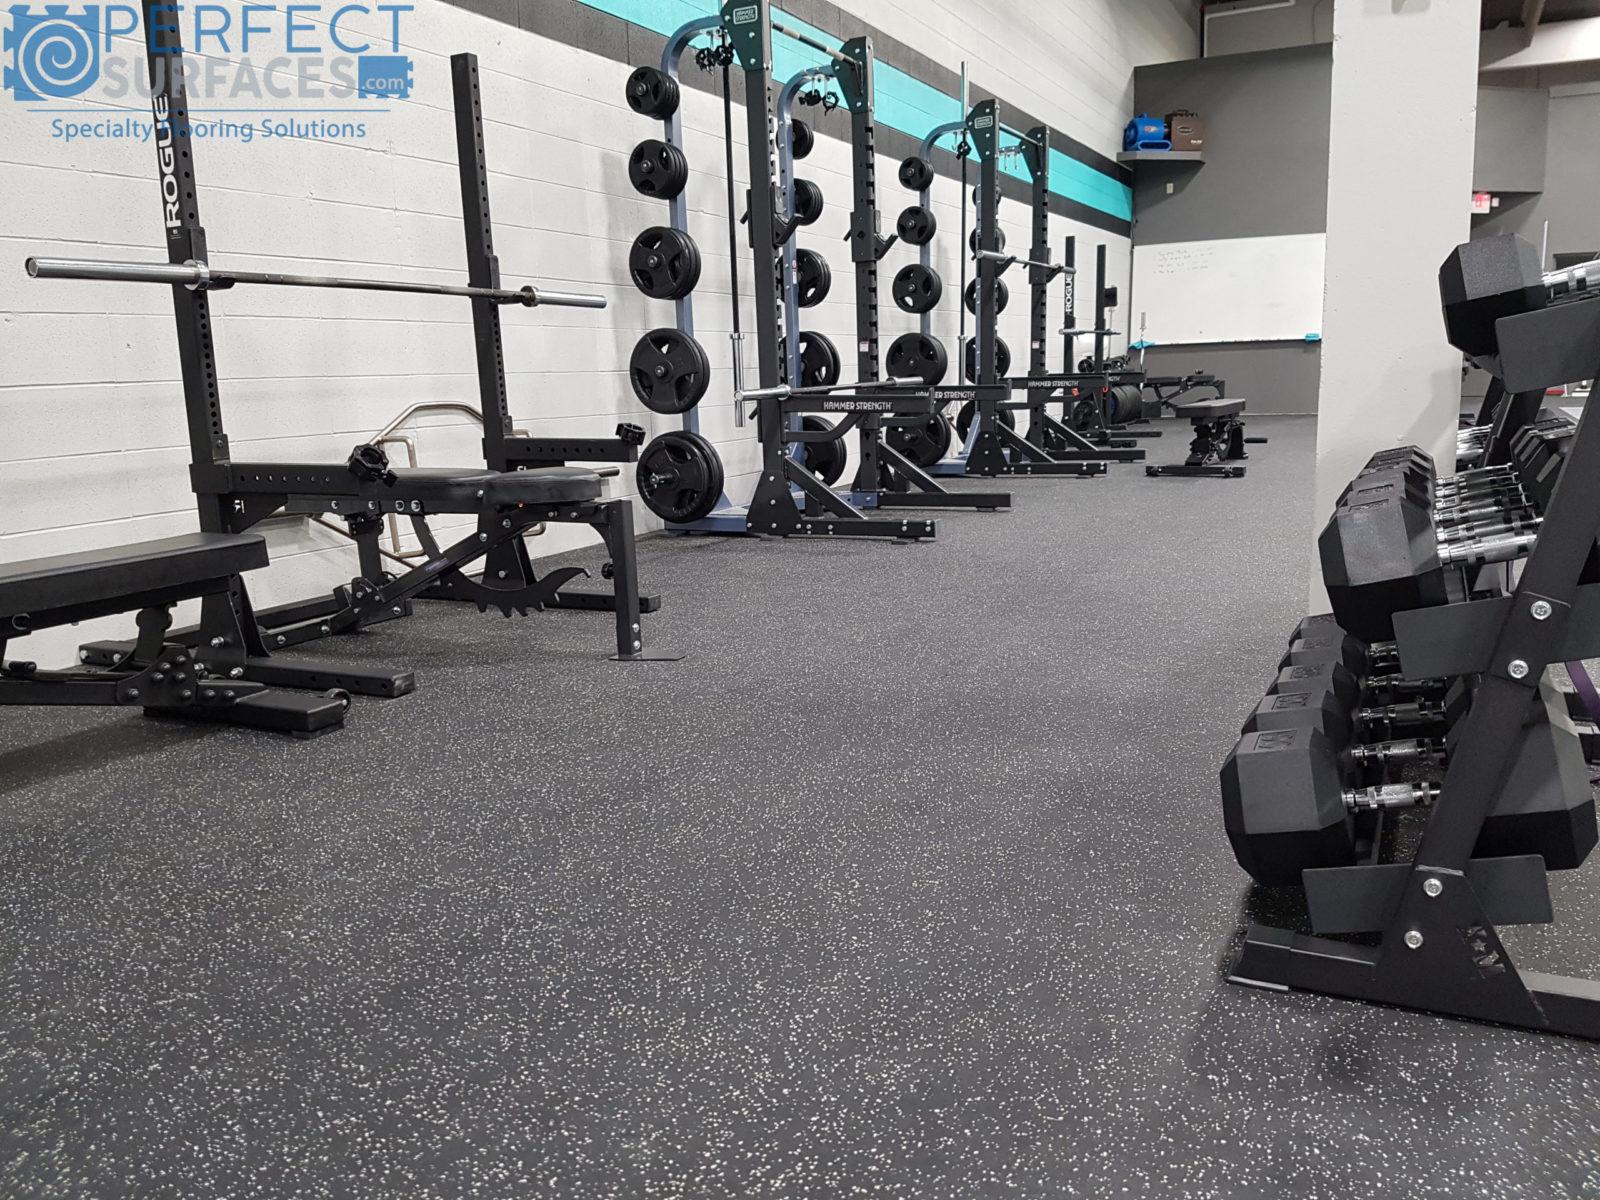 Gym Flooring For The Home Canada Perfect Surfaces